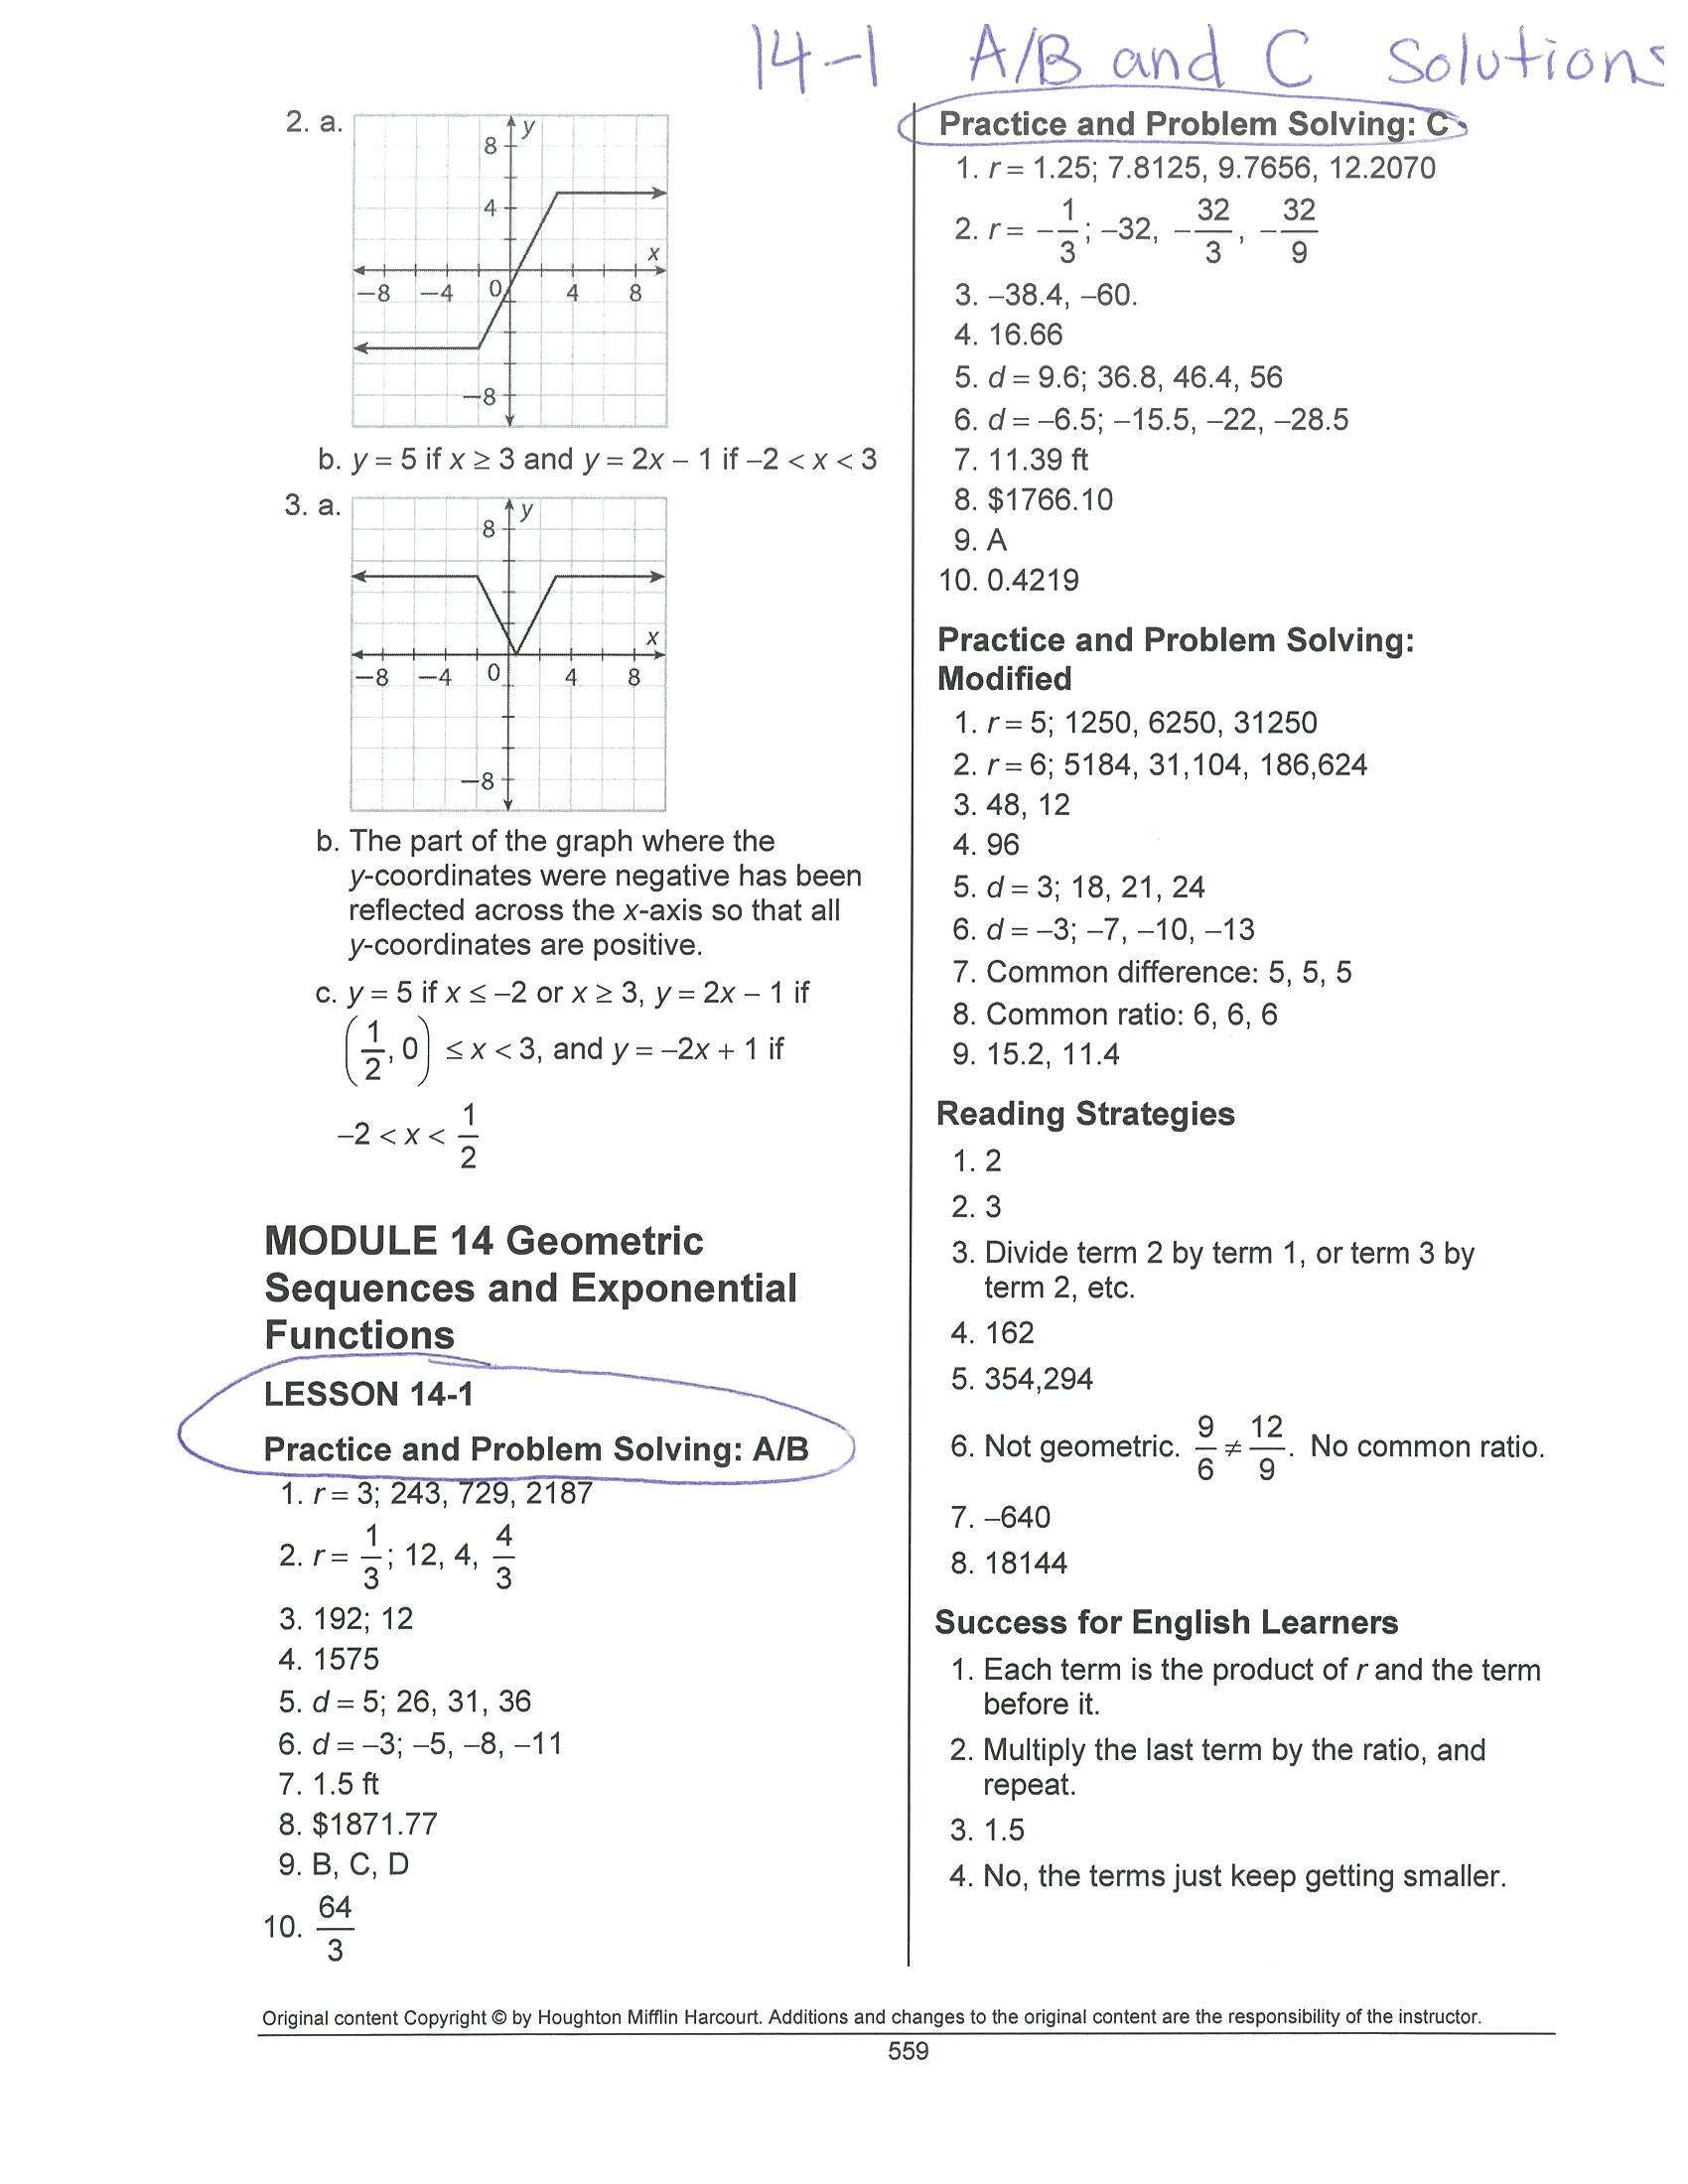 Math Models Worksheet 4 1 Relations And Functions Answers — db-excel.com